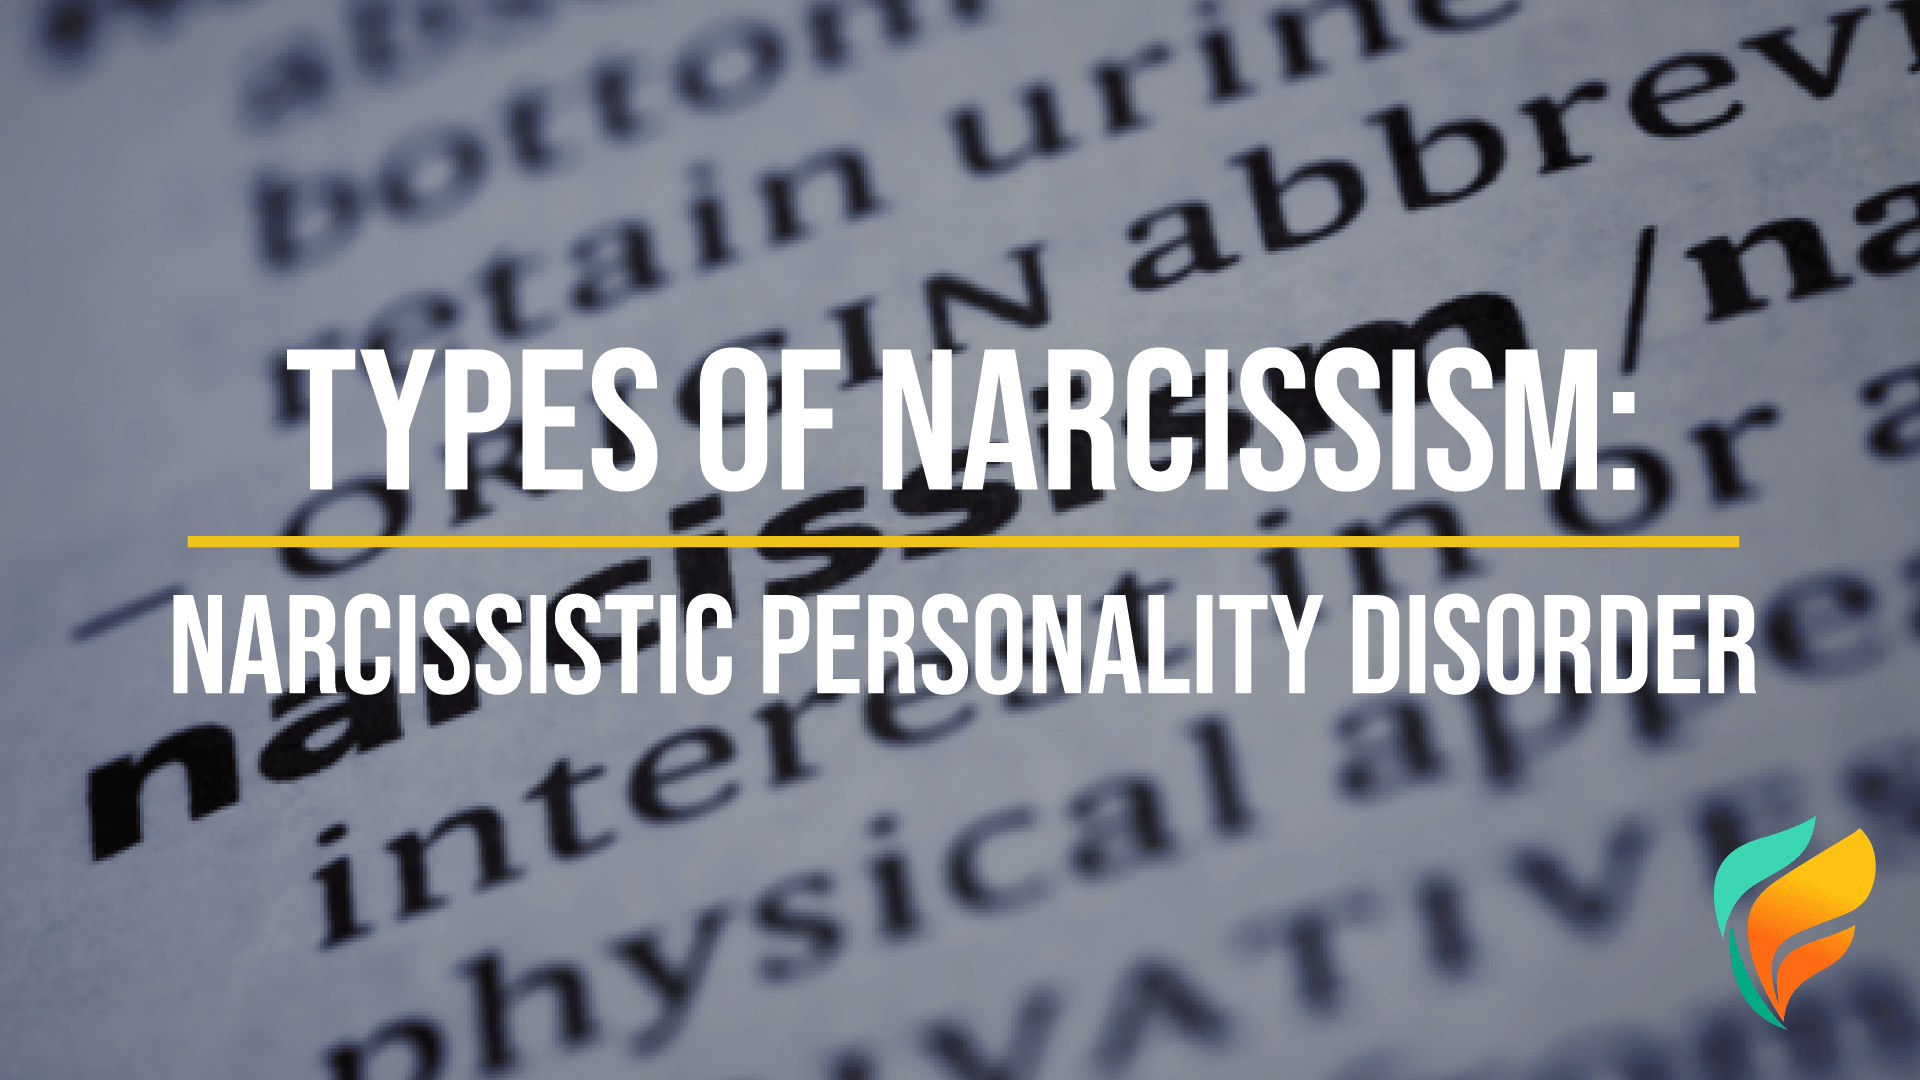 Types of Narcissism: Do You Know the Types of Narcissistic Personality Disorder?